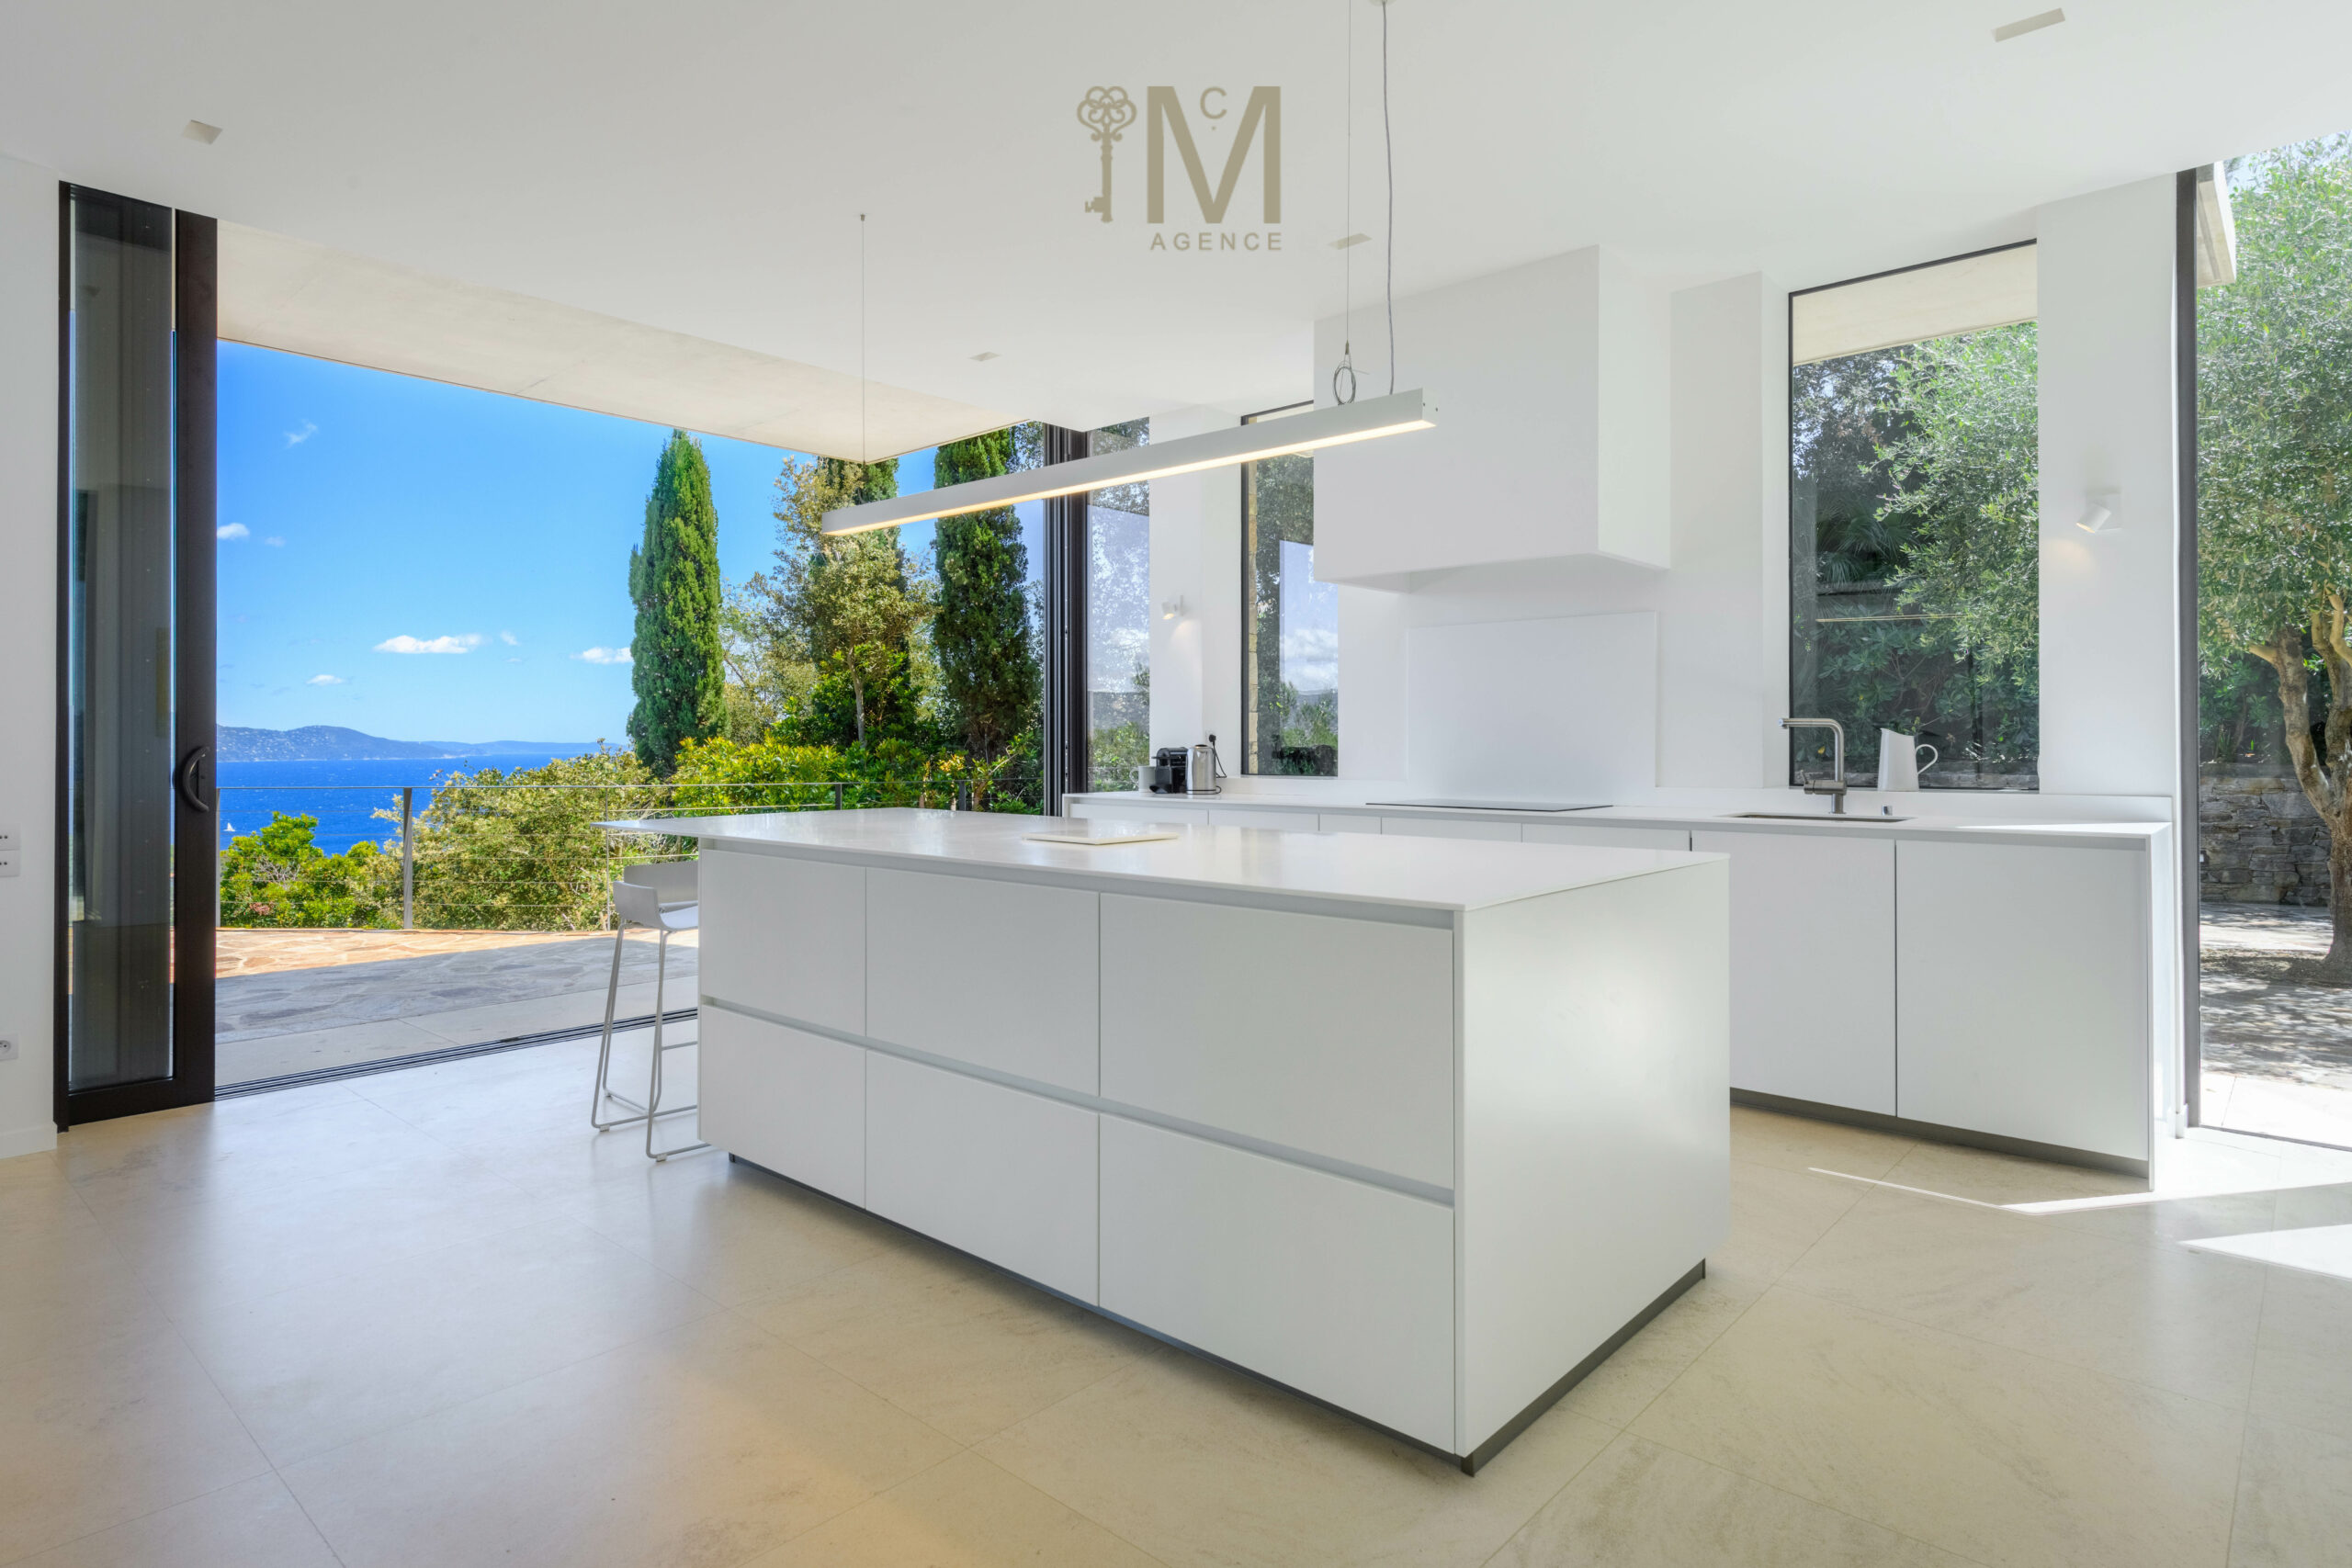 Luxury rental management in the south of France